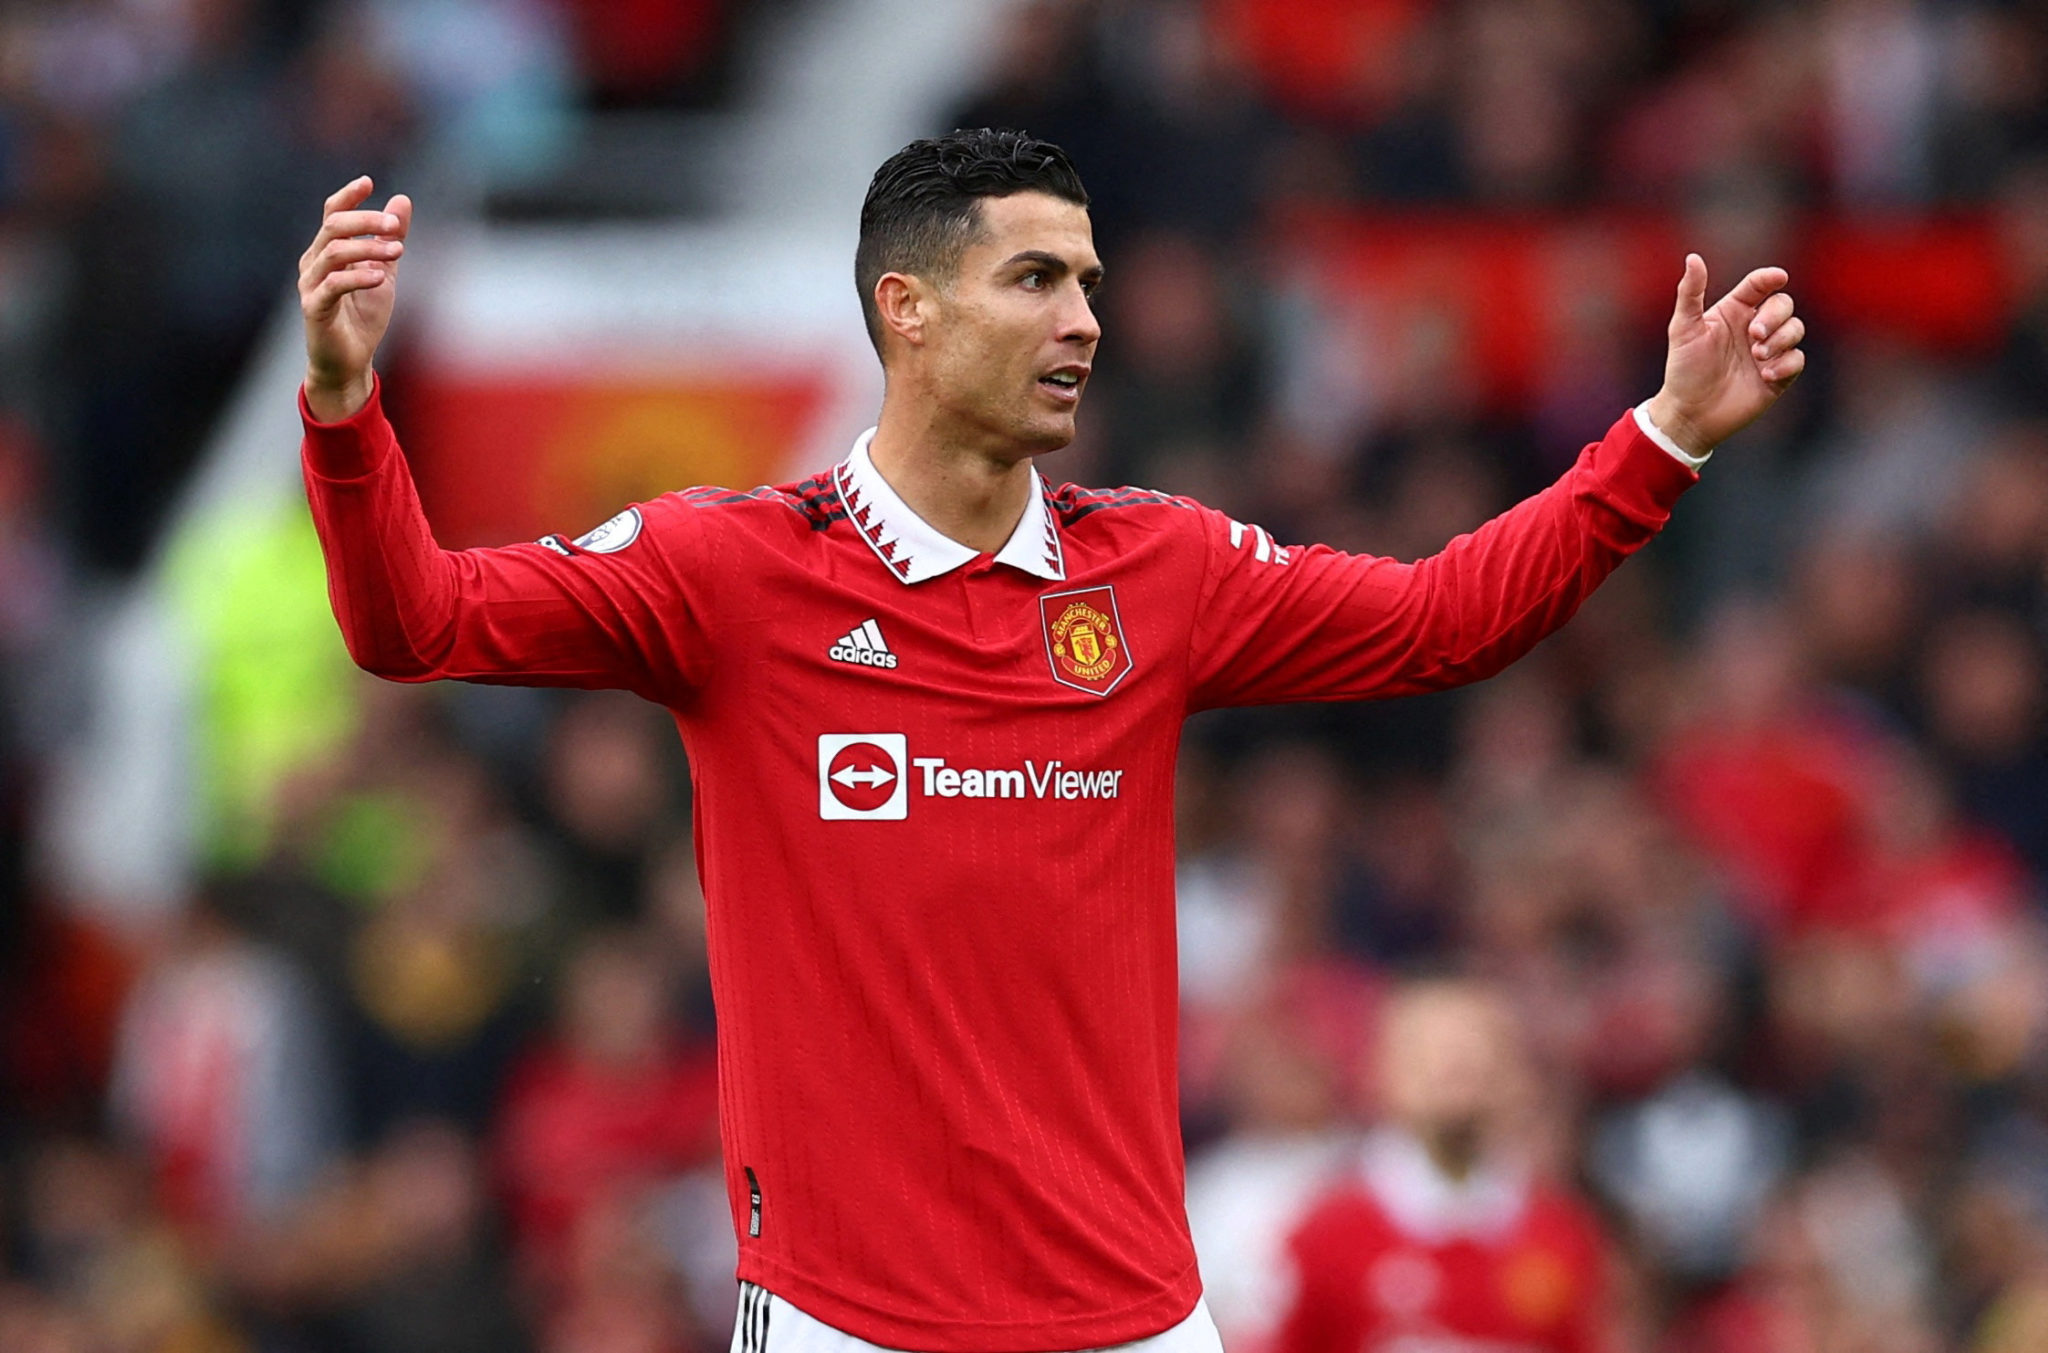 Cristiano Ronaldo of Manchester United claims that Erik ten Hag, the team's manager, has deceived him and that he is being forced out of the club.